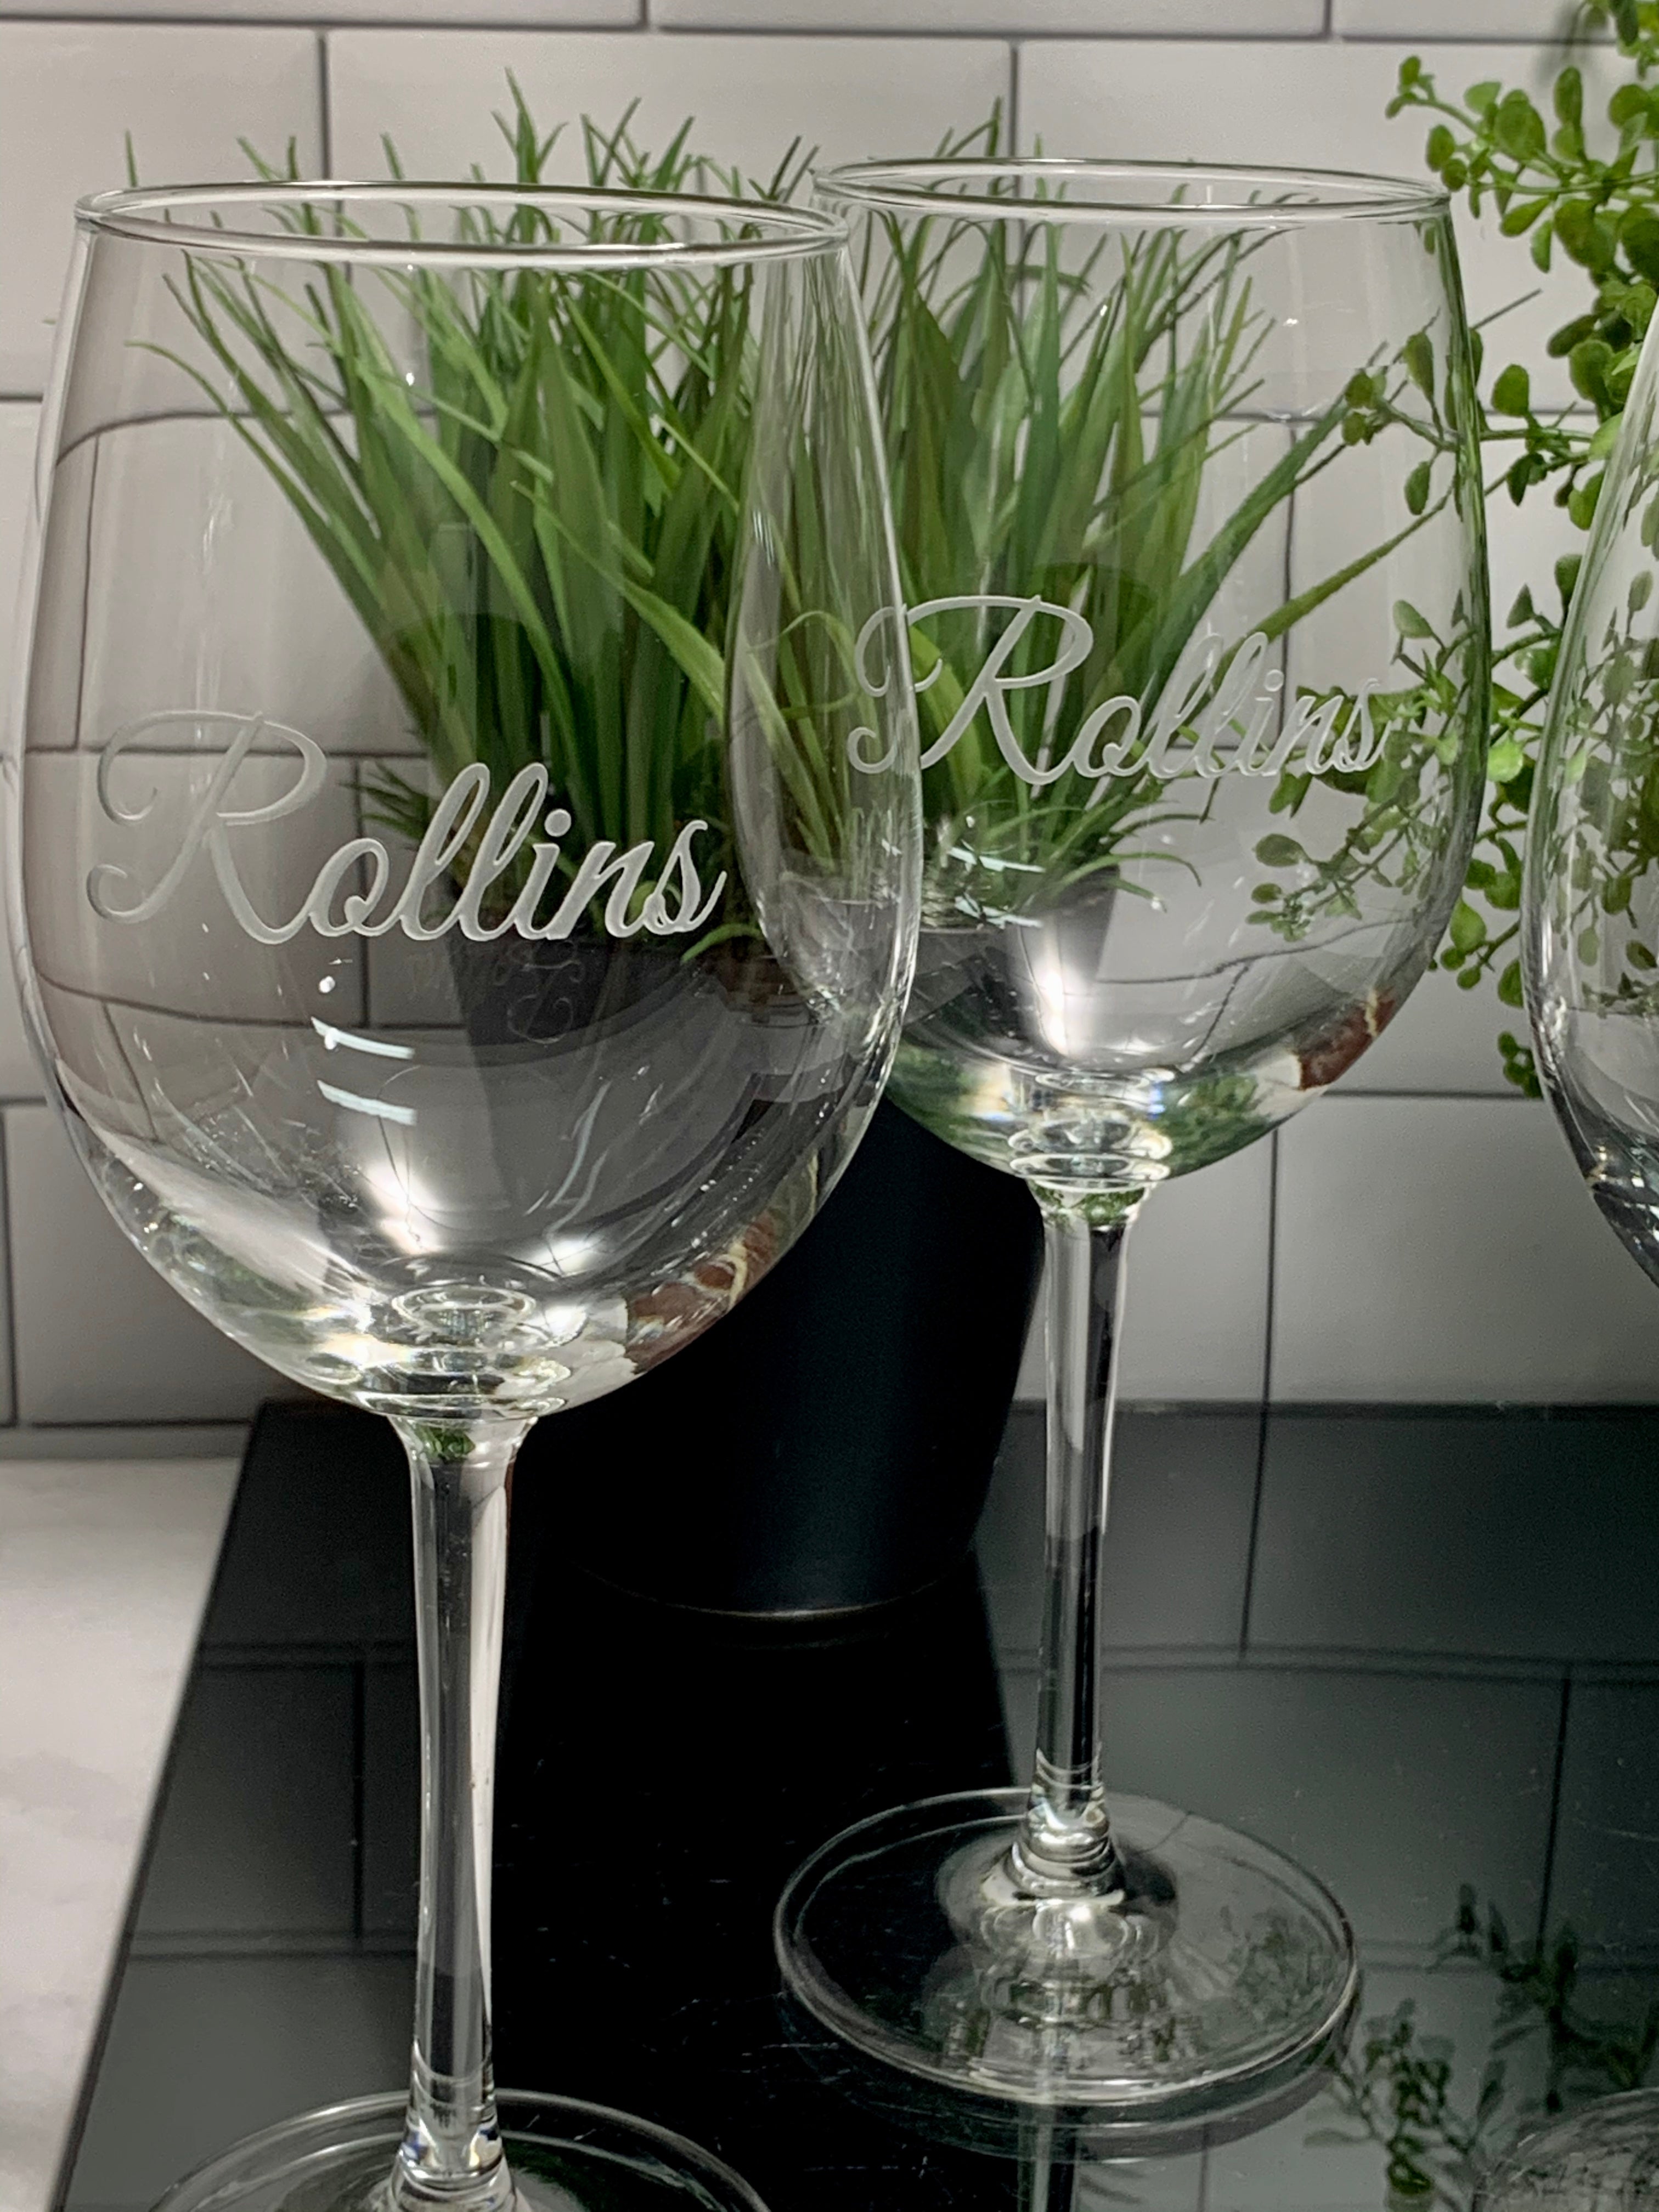 Etched White Wine Glasses Best Friends - Design: BEST - Everything Etched